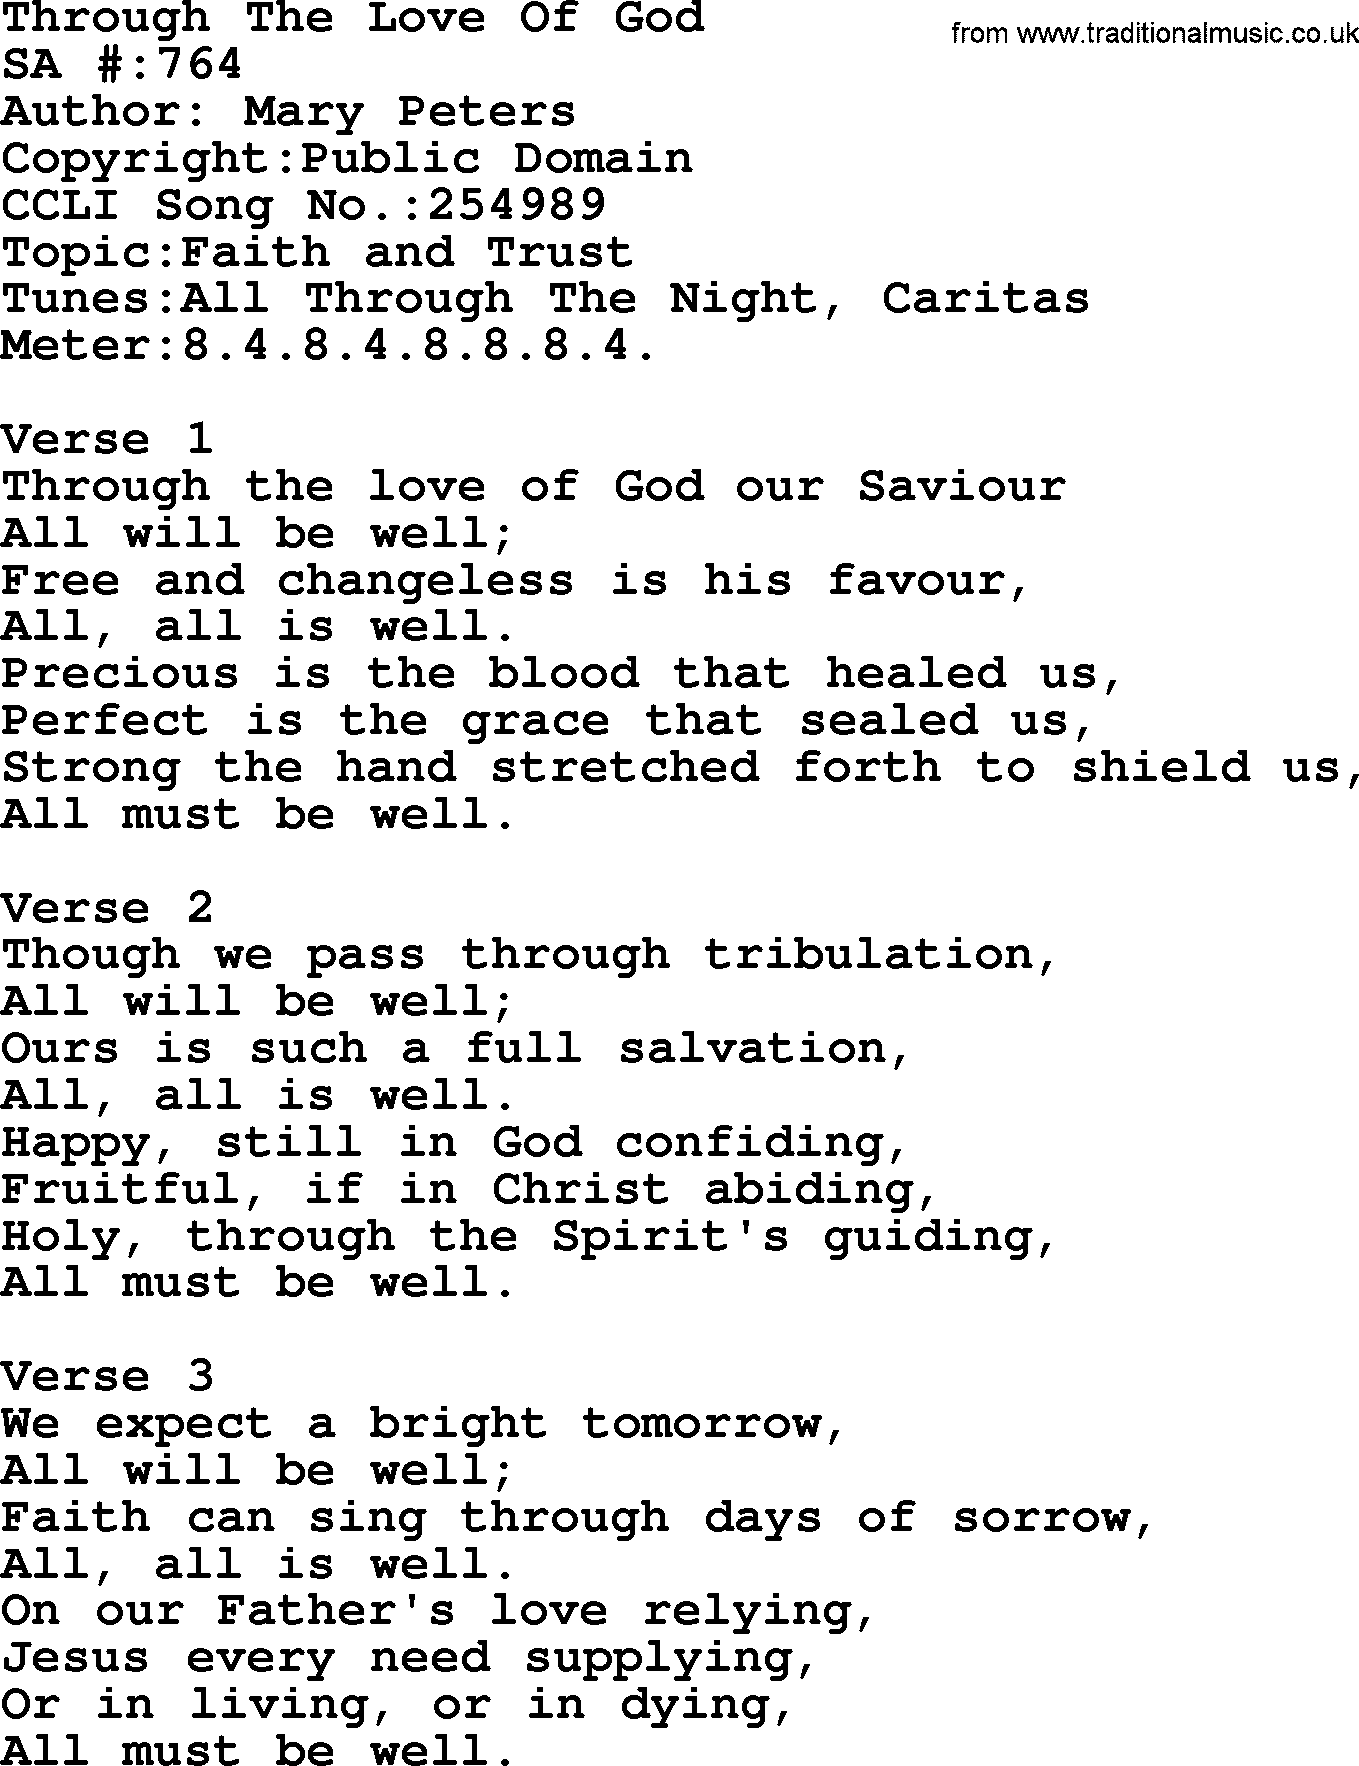 Salvation Army Hymnal, title: Through The Love Of God, with lyrics and PDF,